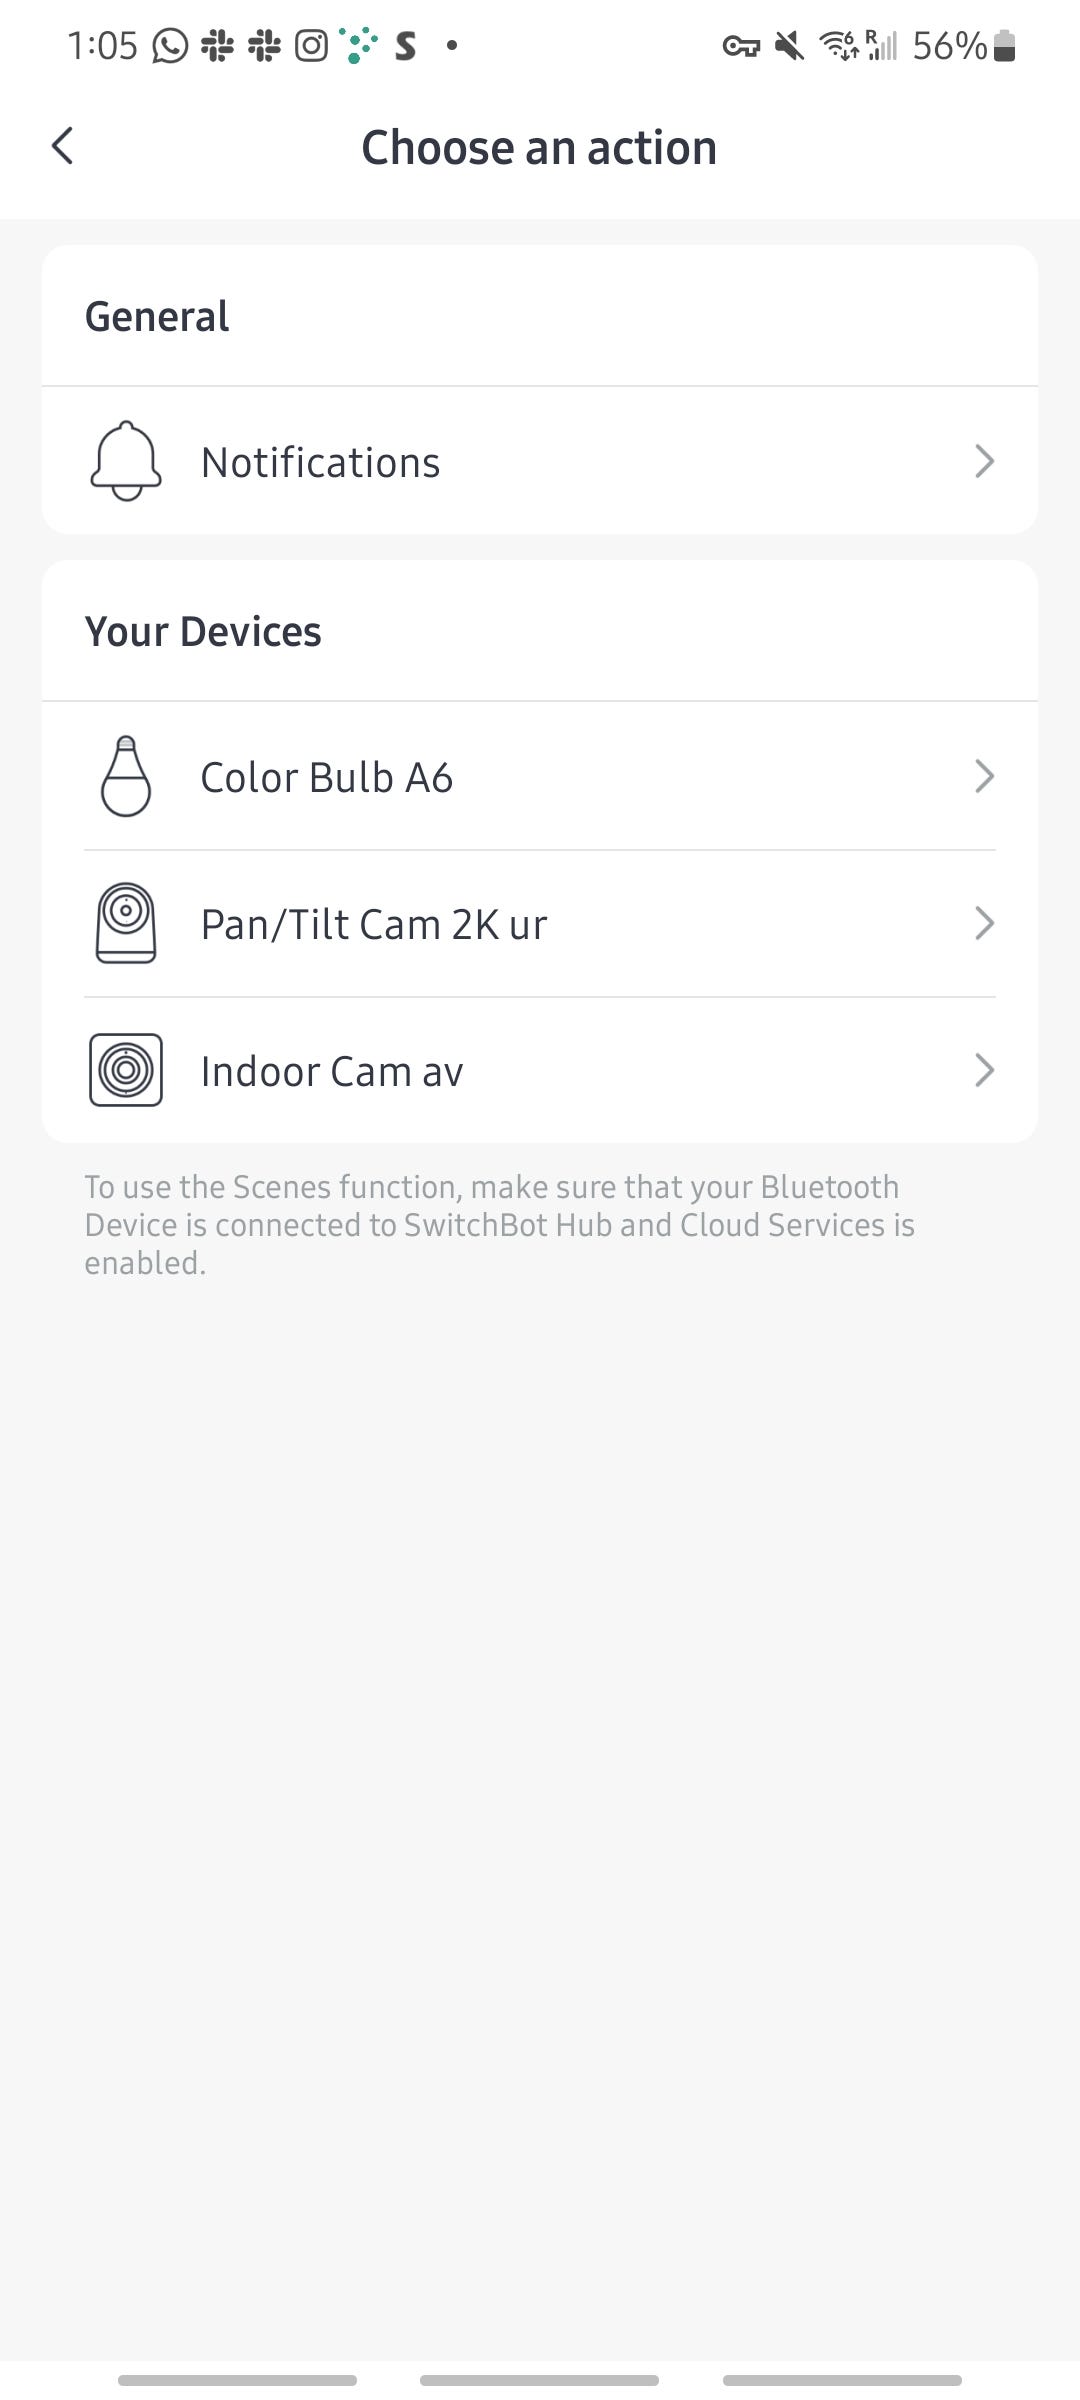 SwitchBot Hub 2 action selection in the SwitchBot app